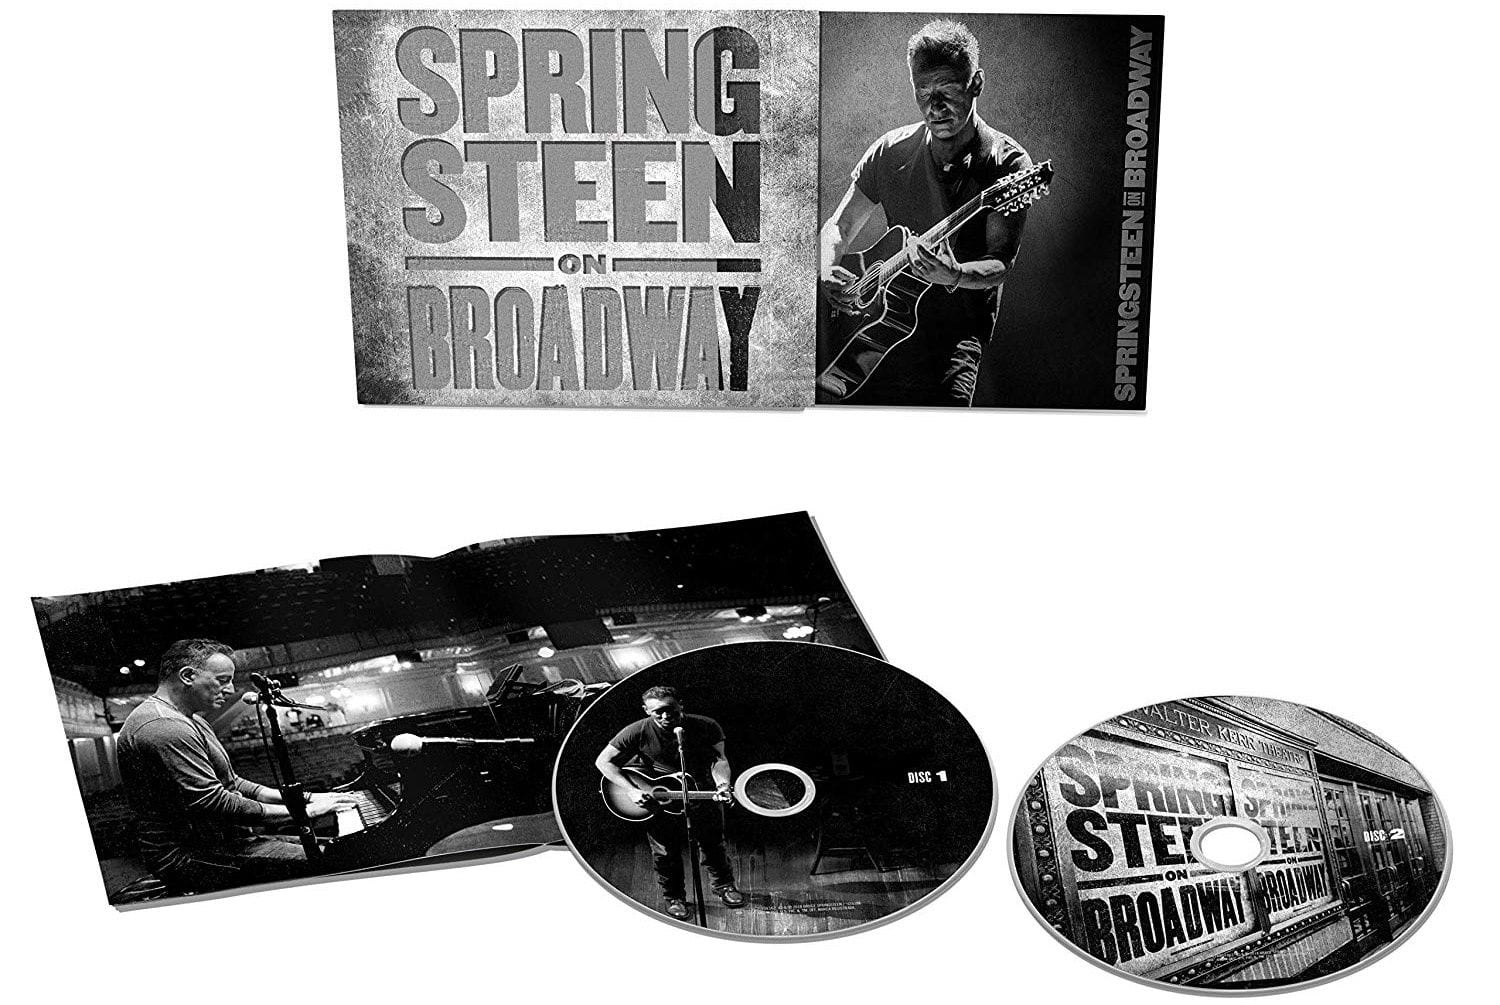 ‘Springsteen on Broadway’ Is Springsteen Fully Owning the Myth of the Working Class Hero